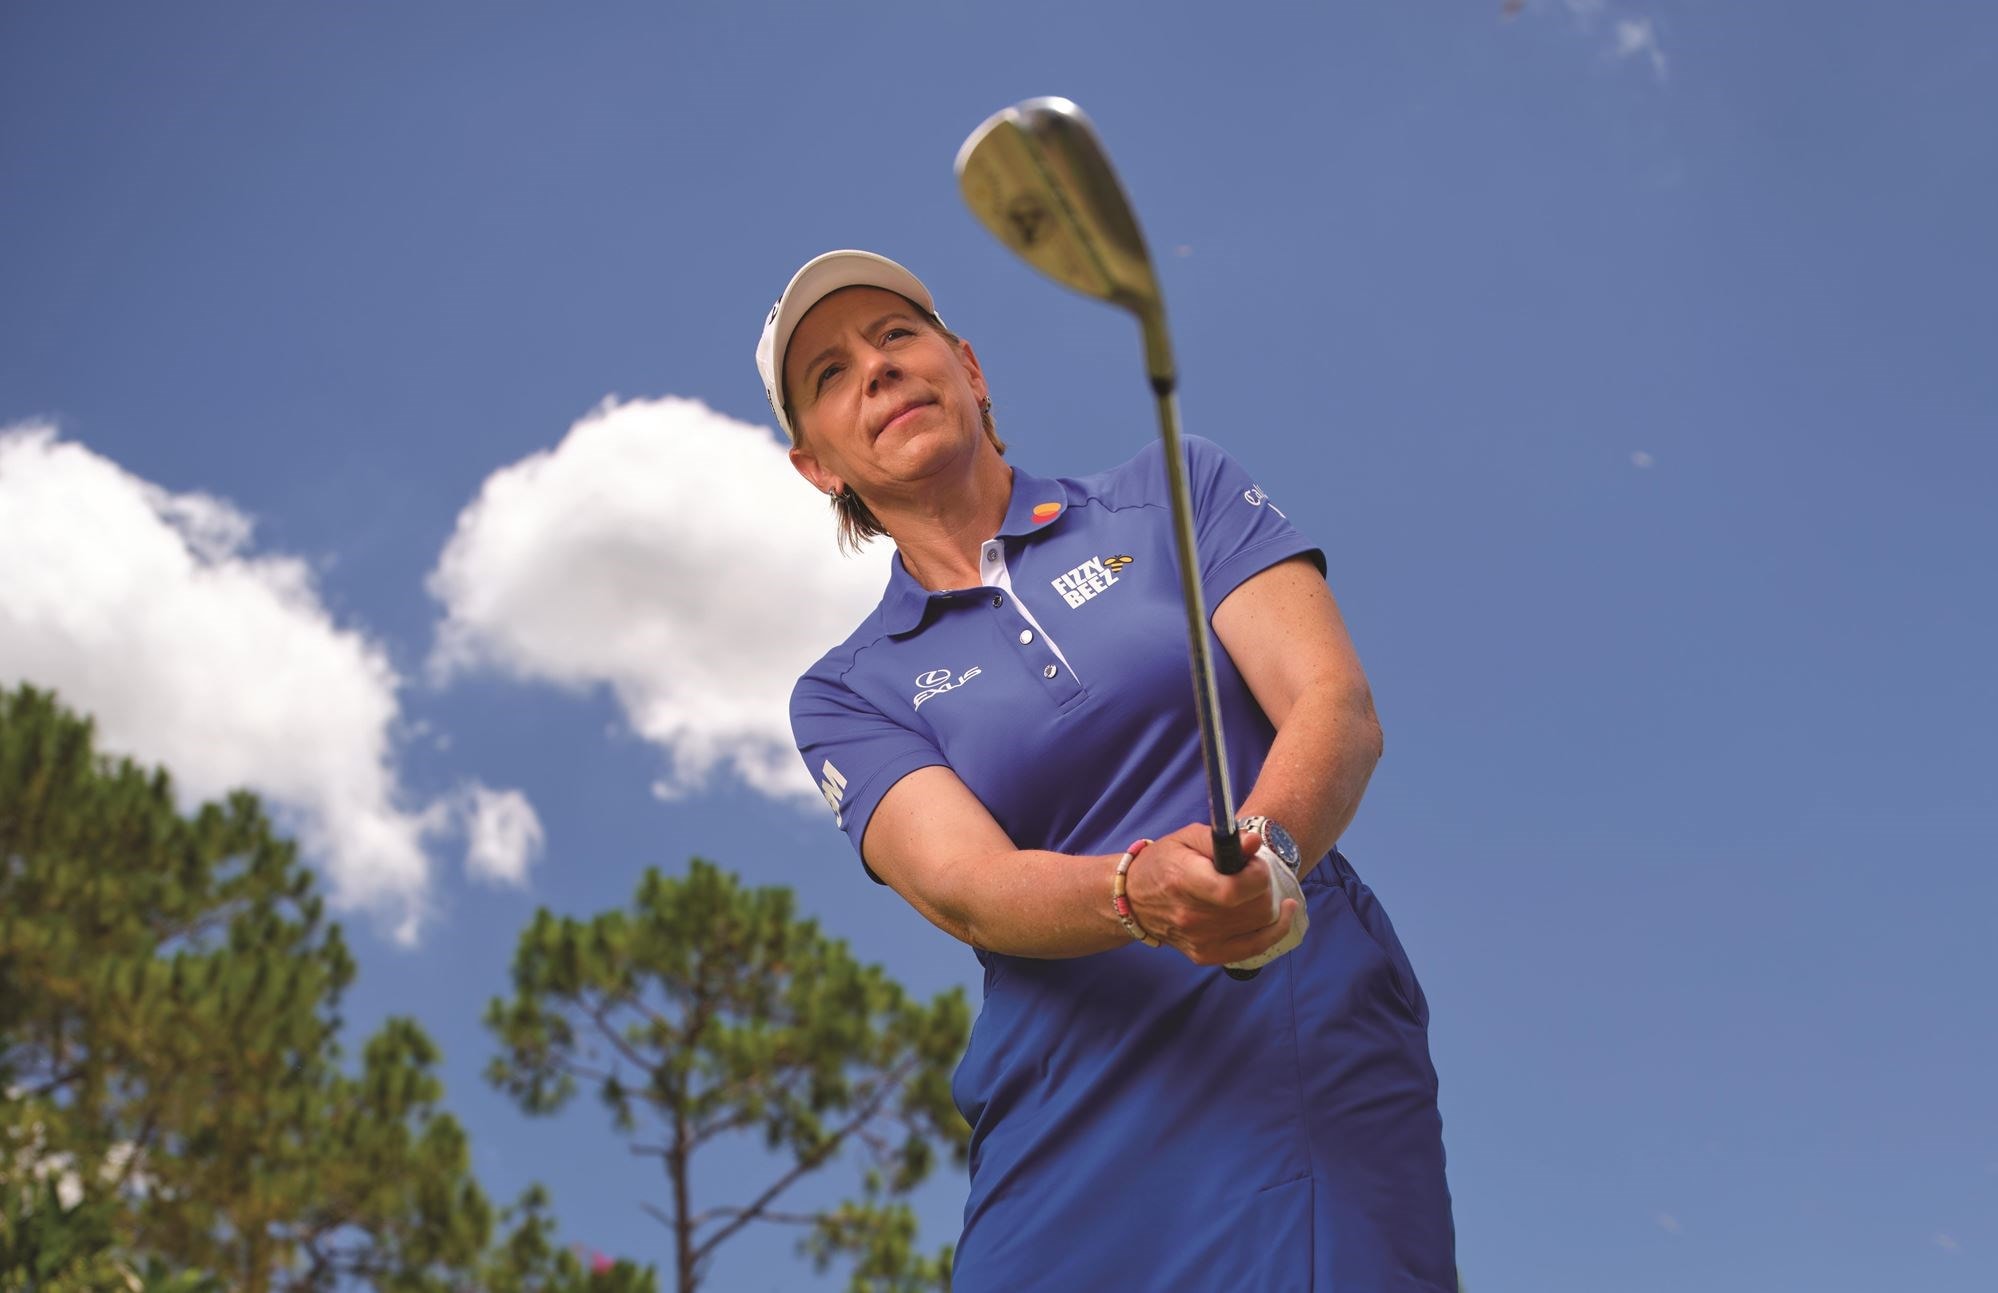 While family is her focus, golf legend Annika Sörenstam finds time to give back through the game that made her famous.